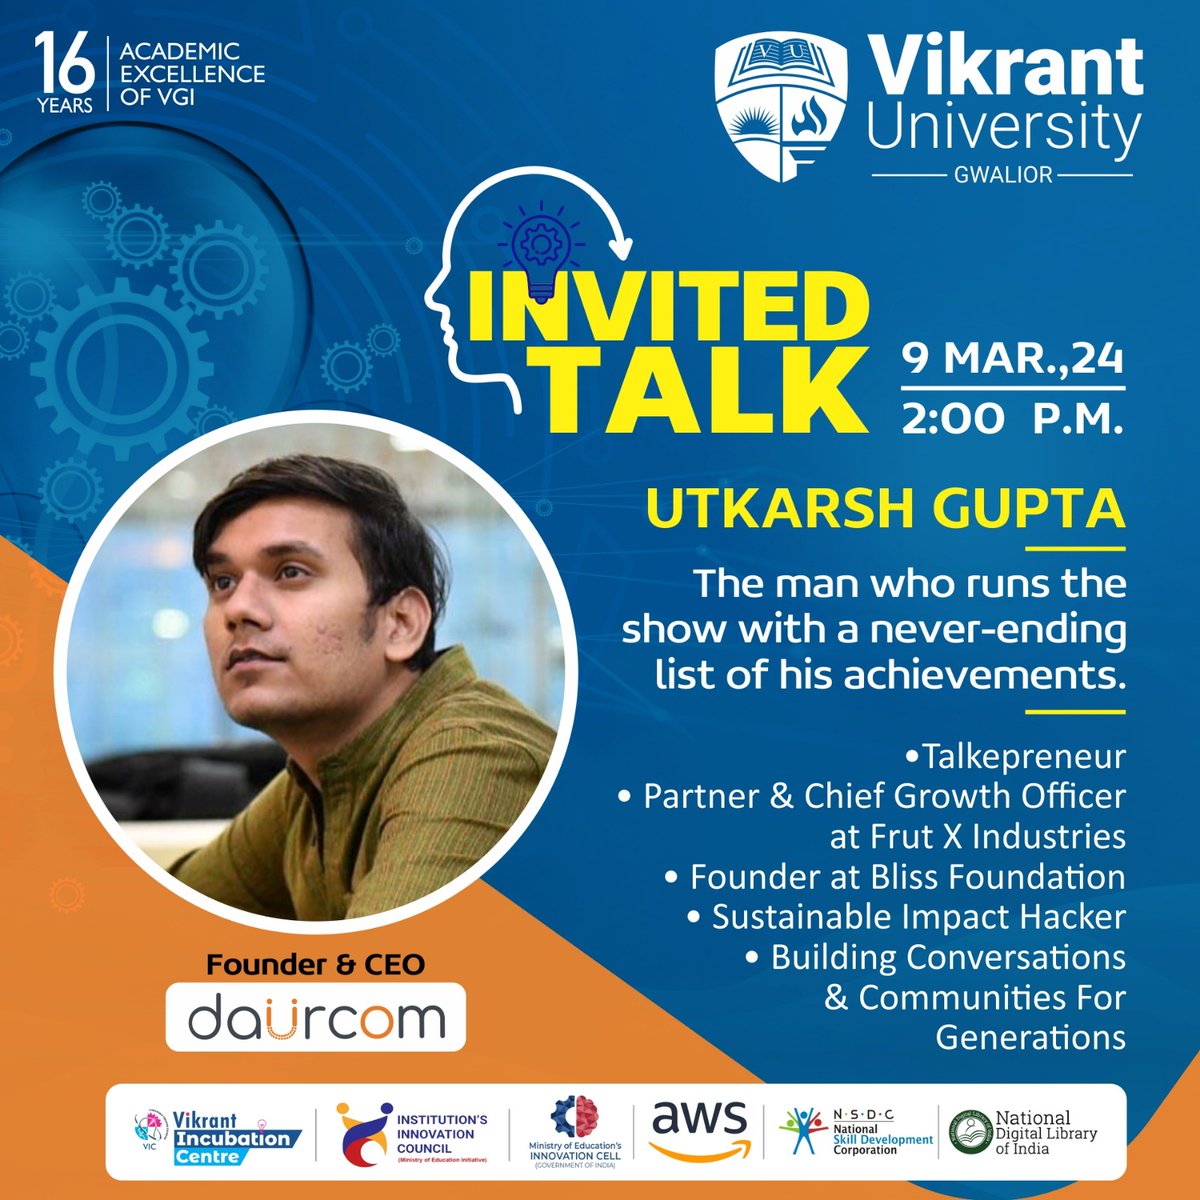 Vikrant University is delighted to announce an upcoming invited talk by Mr. UTKARSH GUPTA, an esteemed young leader and the Founder & CEO of DaurCom.

#VikrantUniversity #DaurCom #VikrantGroupofInstitutions #Gwalior #Indore #MadhyaPradesh #India #InvitedTalk #Entrepreneurship